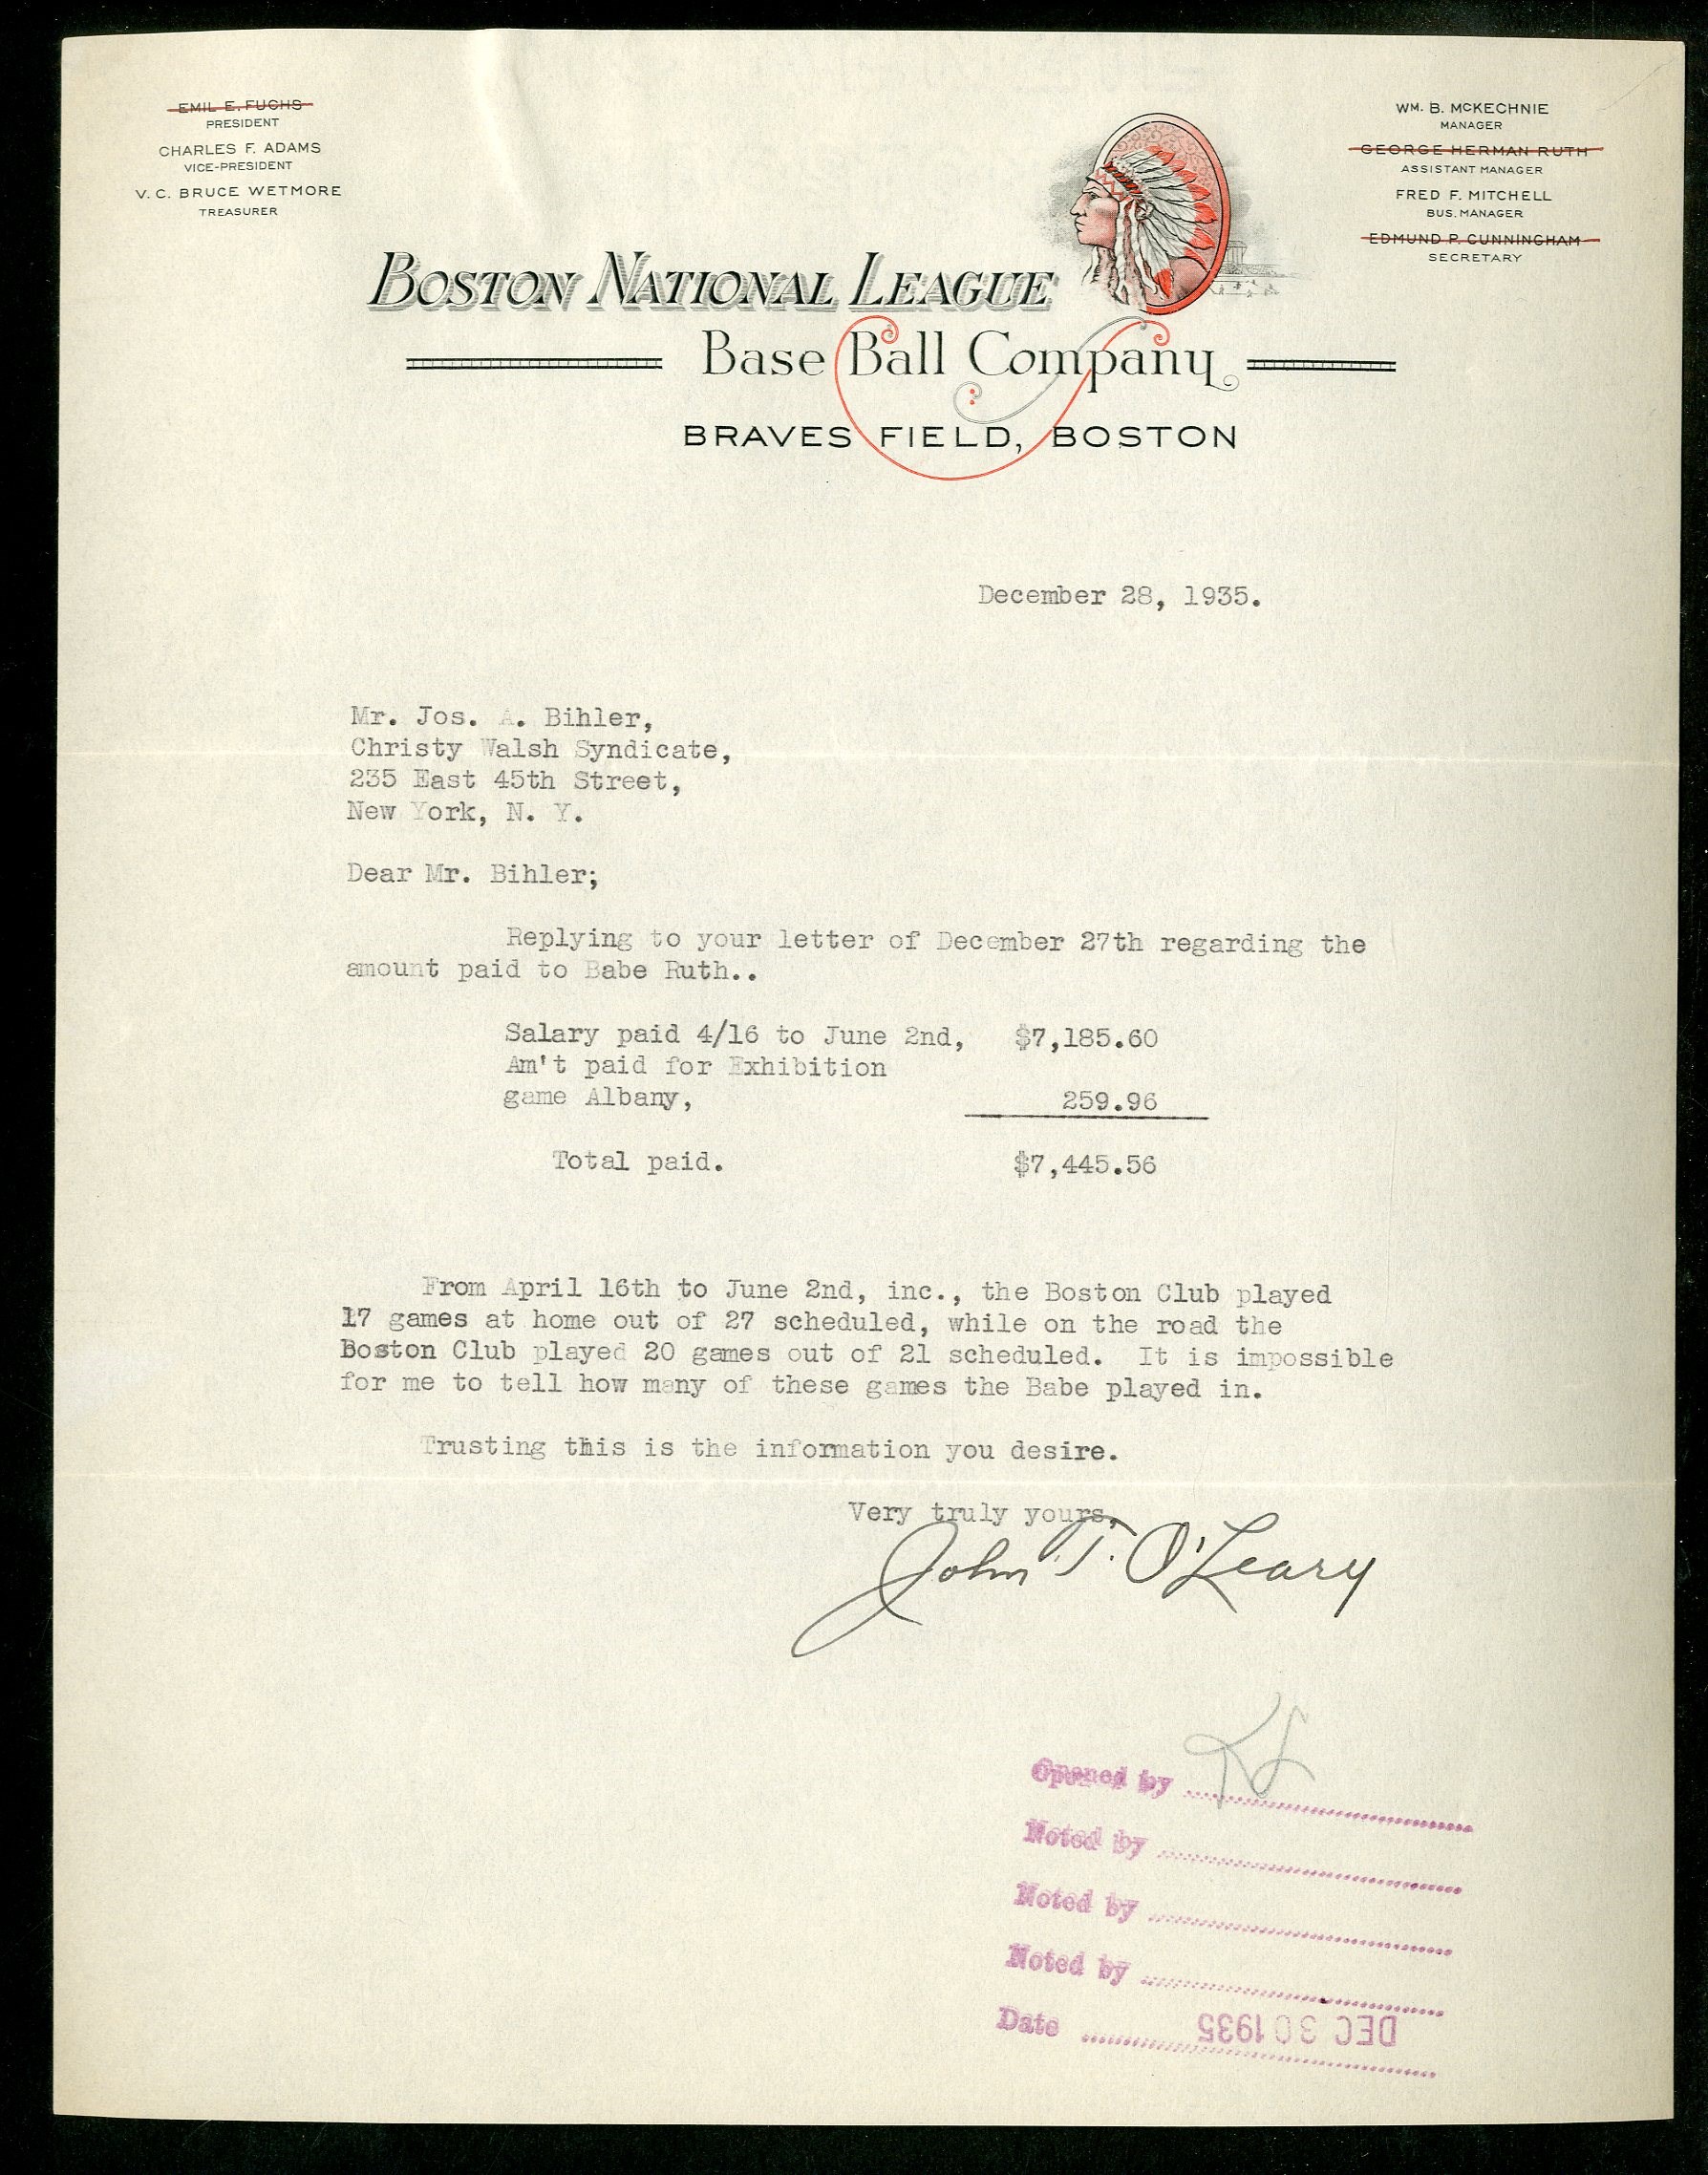 Collection Of Babe Ruth's Right Hand Man - 1935 Babe Ruth "Ripped Off" by Boston Braves Letter